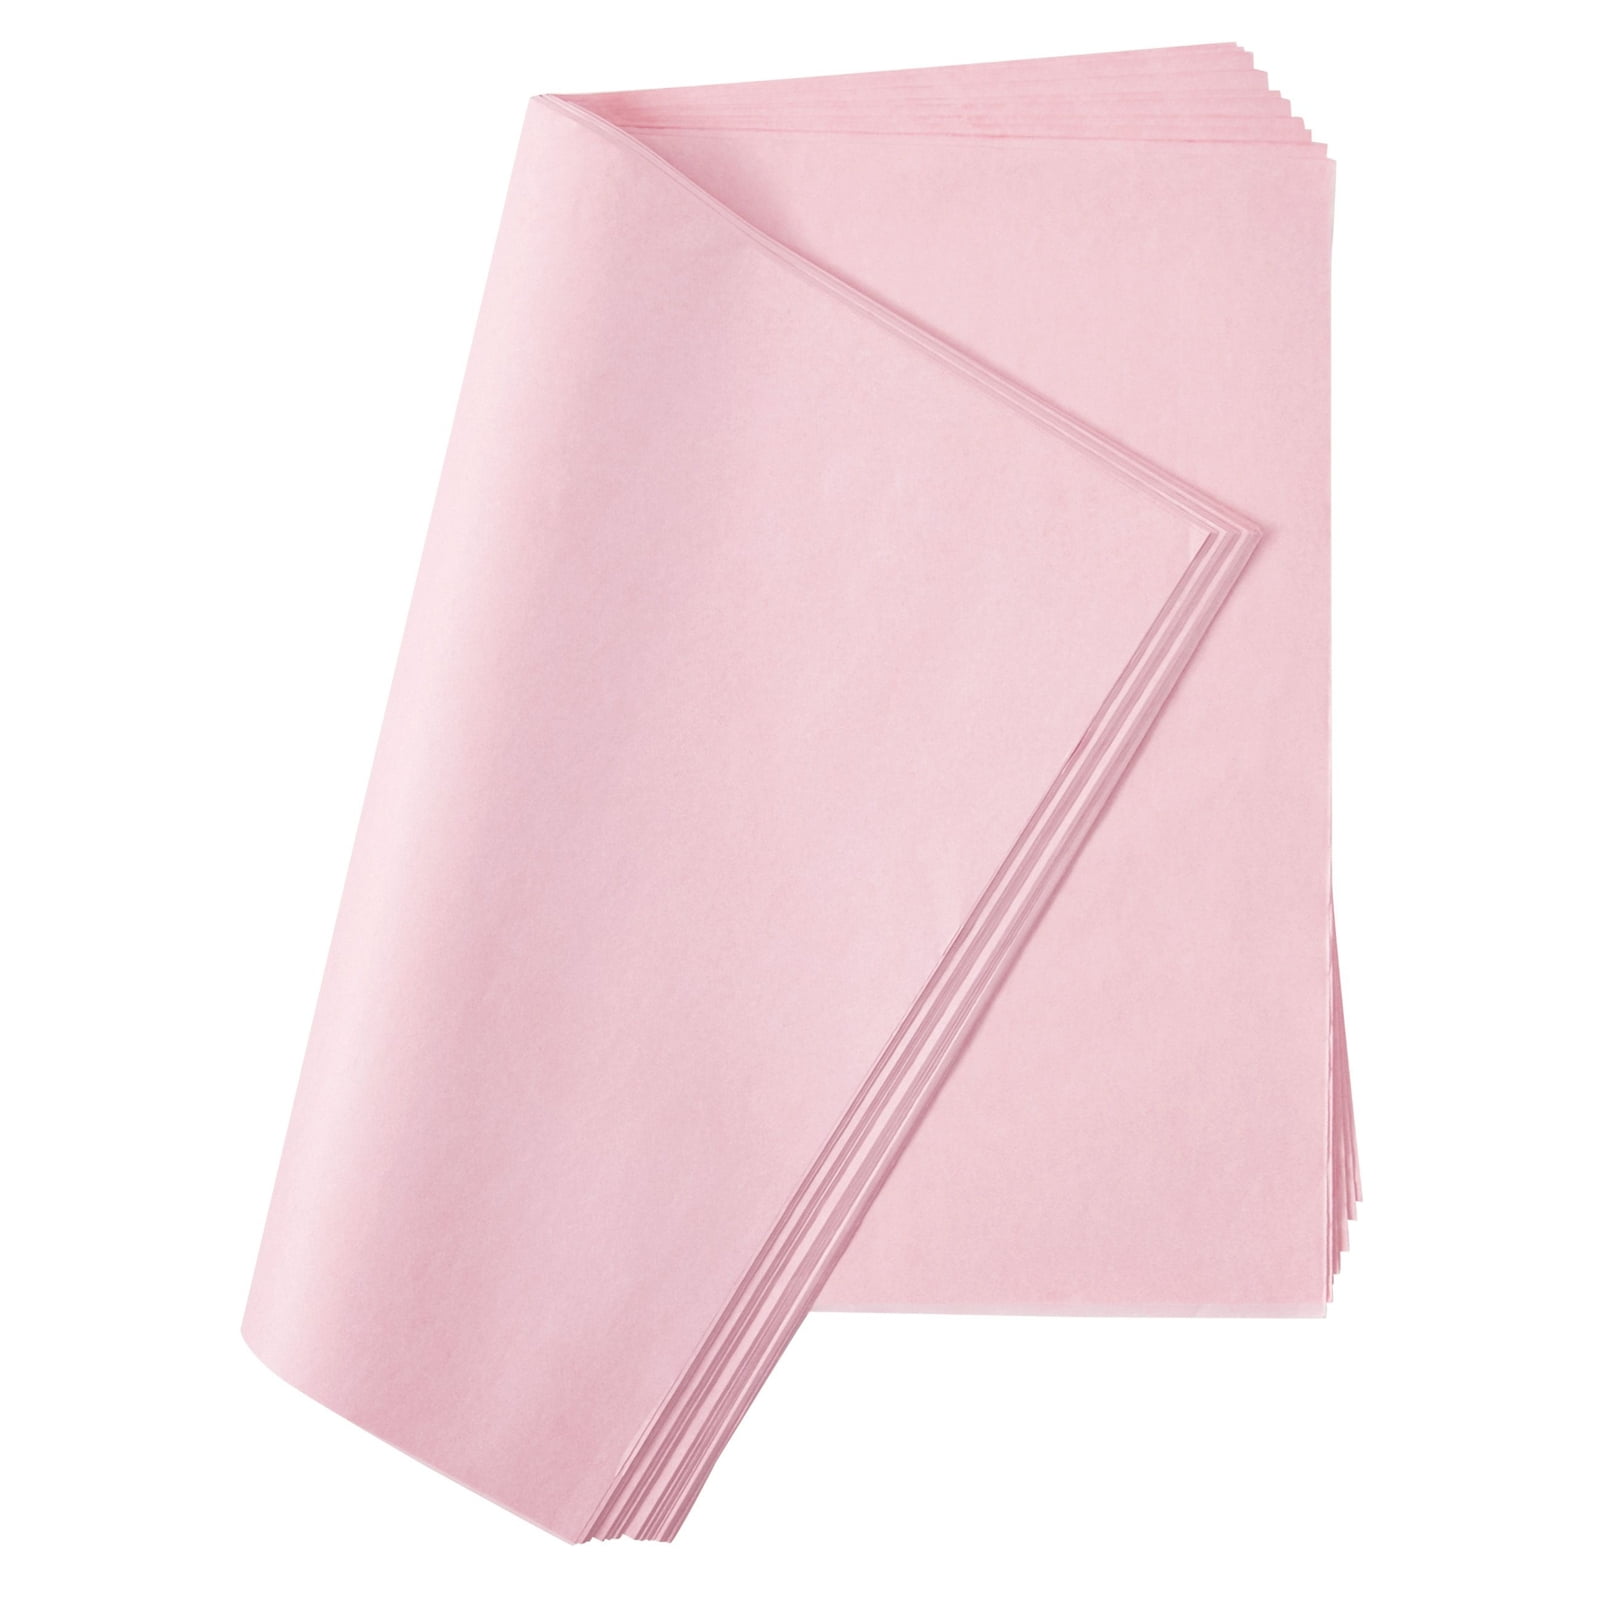 Lavex 20 x 30 10# Light Pink Tissue Paper Sheets - 480/Pack